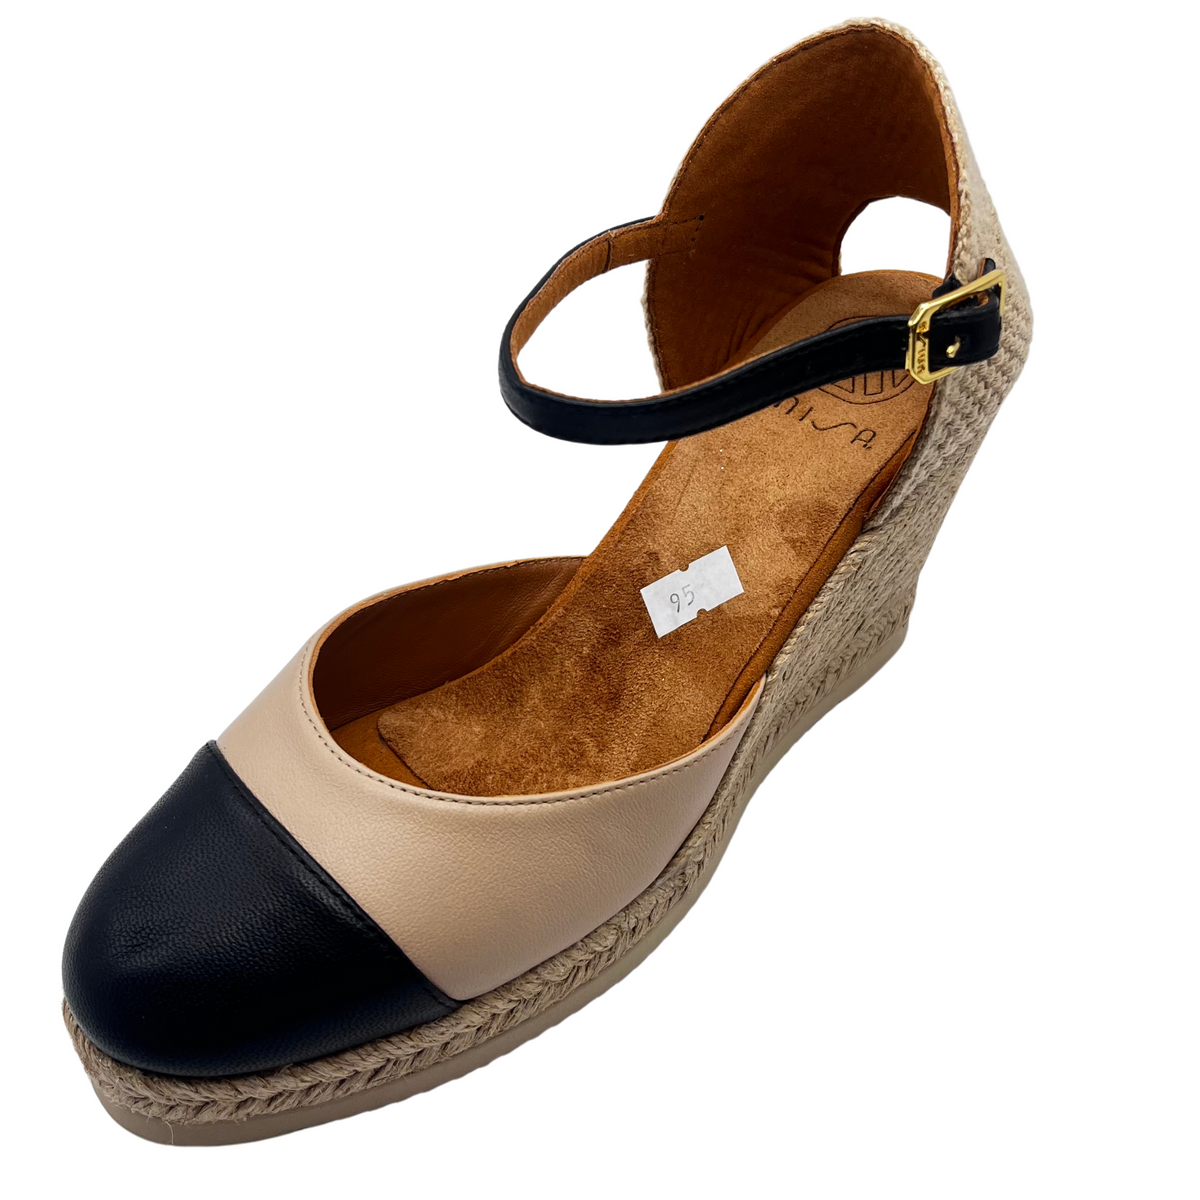 Unisa Leather Beige and Black Wedge With Woven